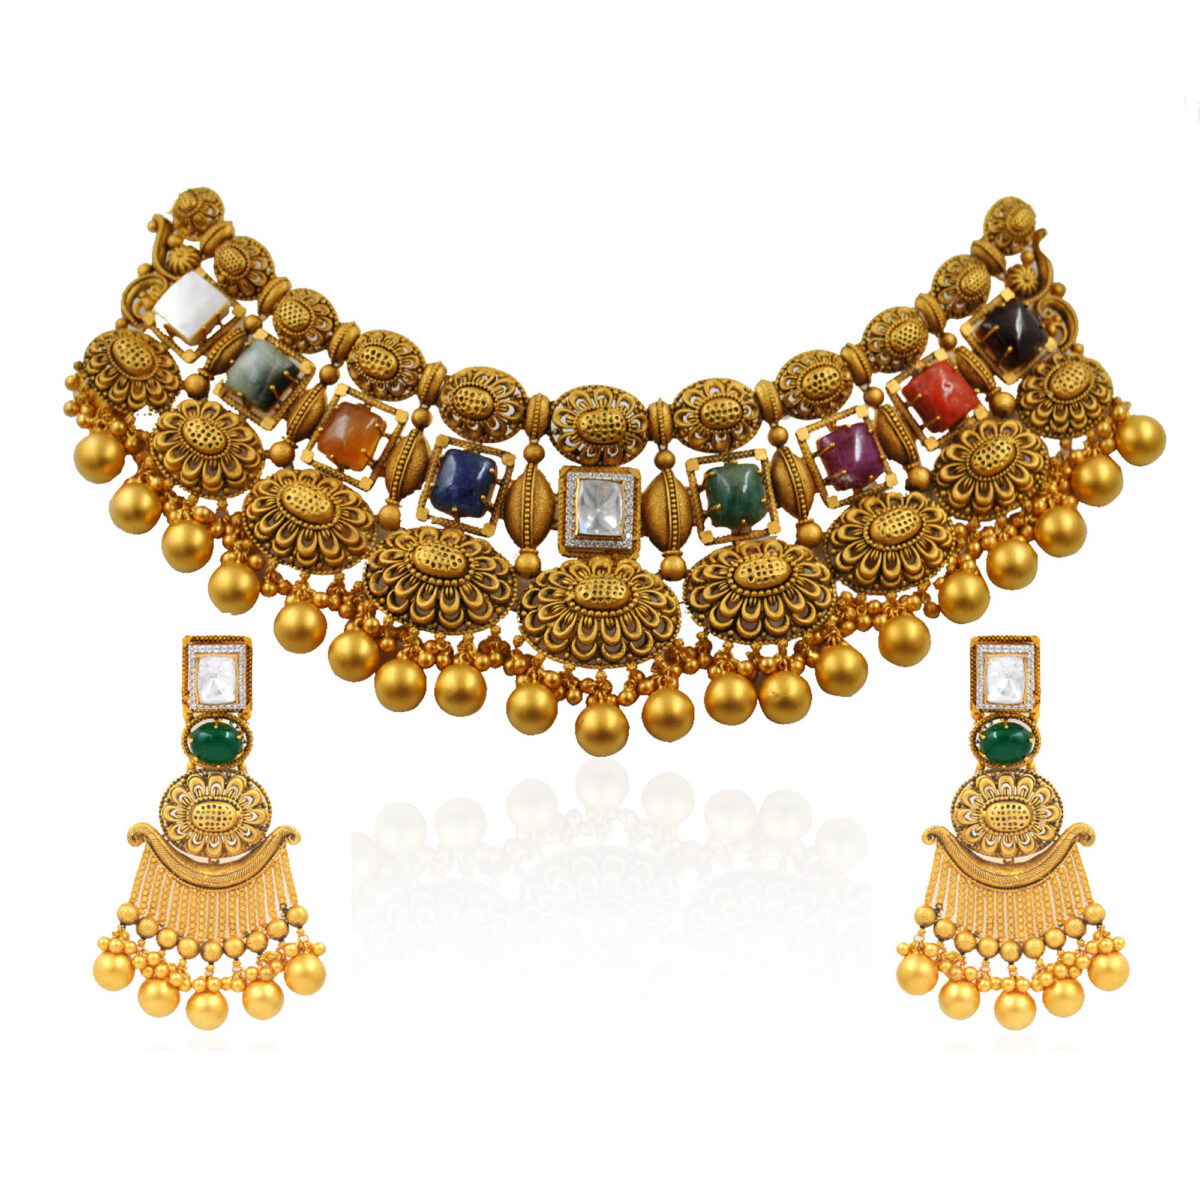 Navaratna Special Antique Gold Choker Necklace - RK Jewellers